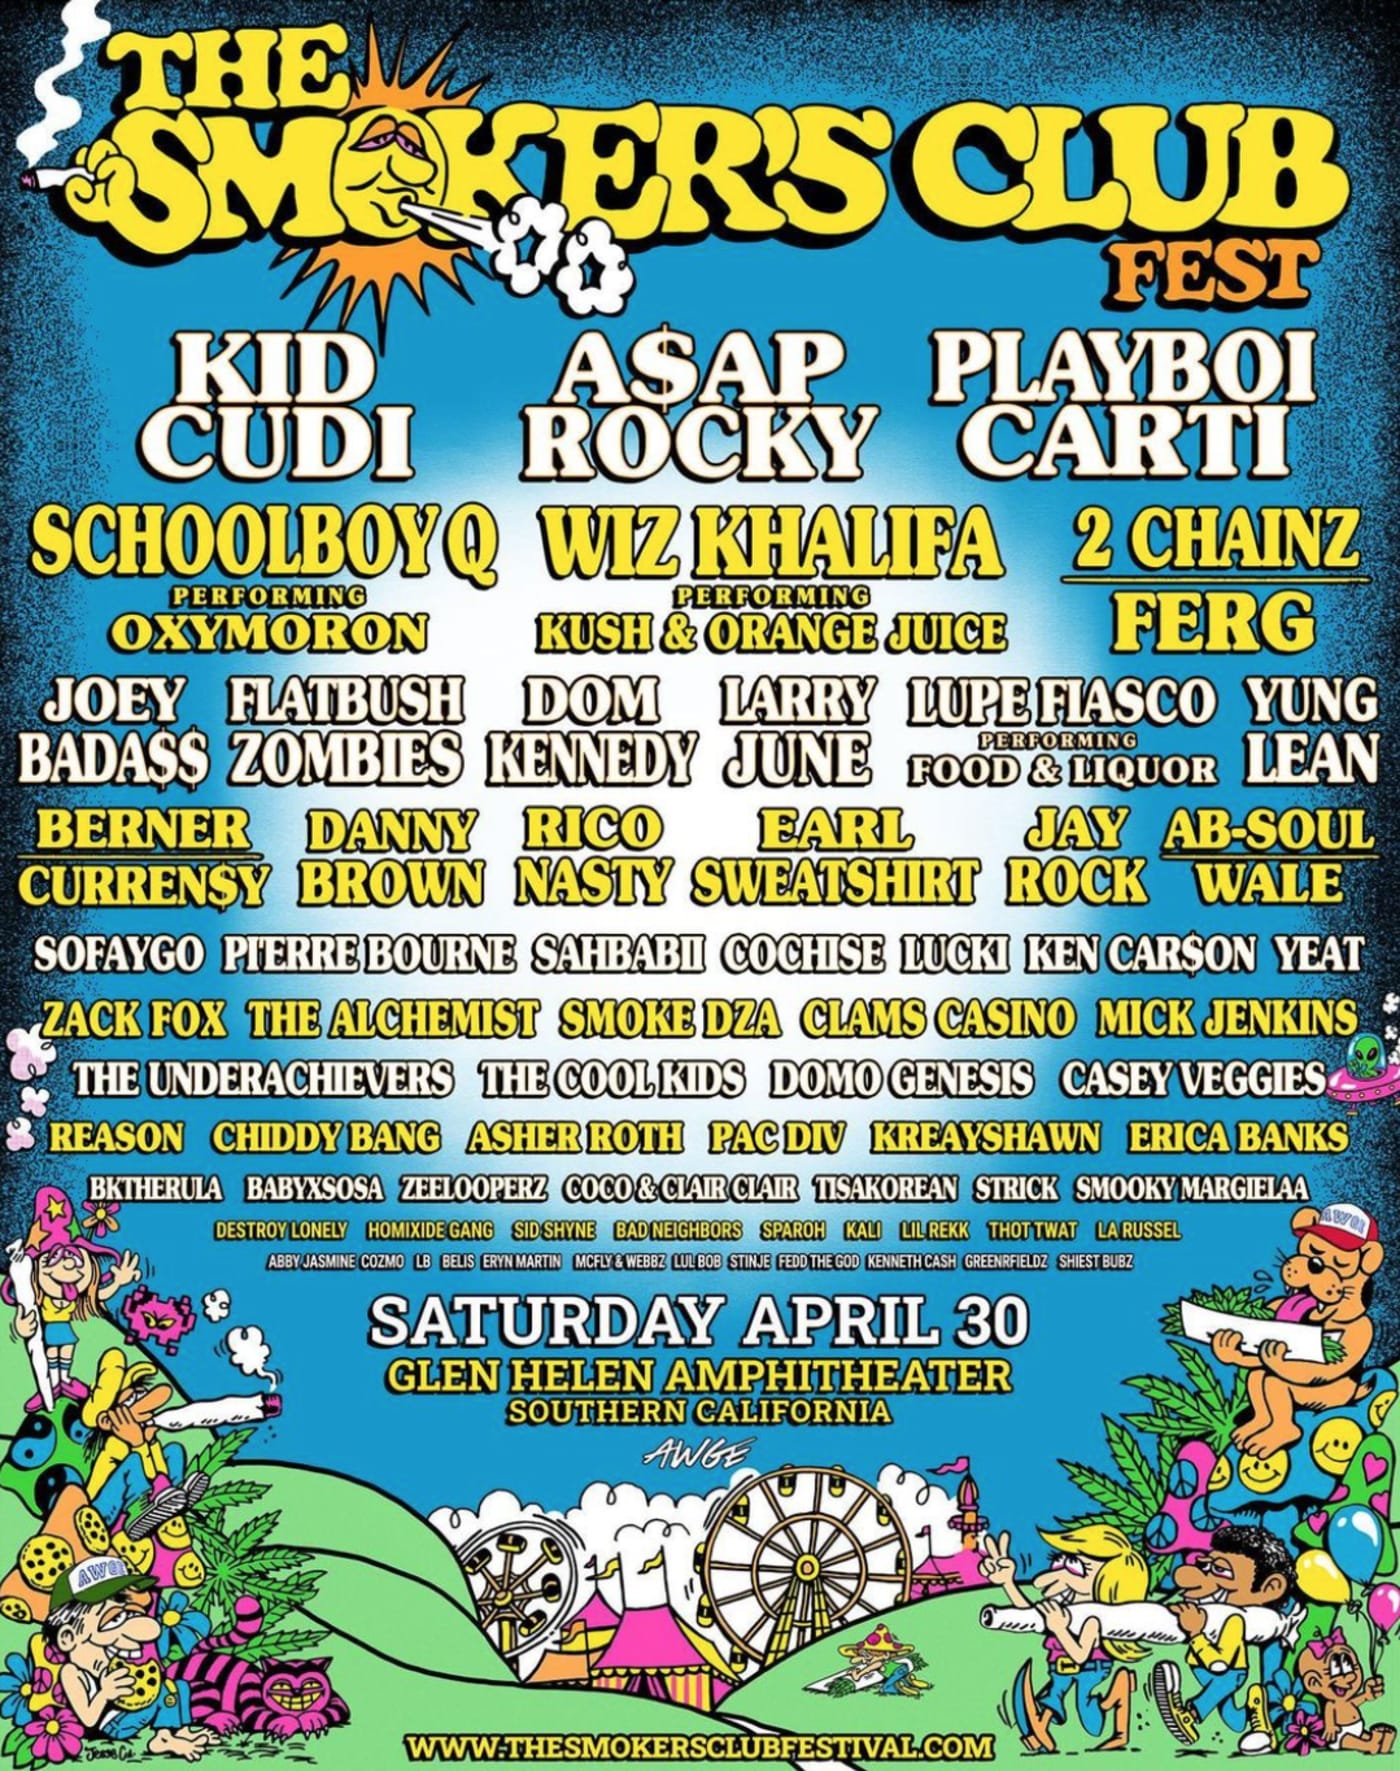 A flyer for Smokers Club Fest is shown